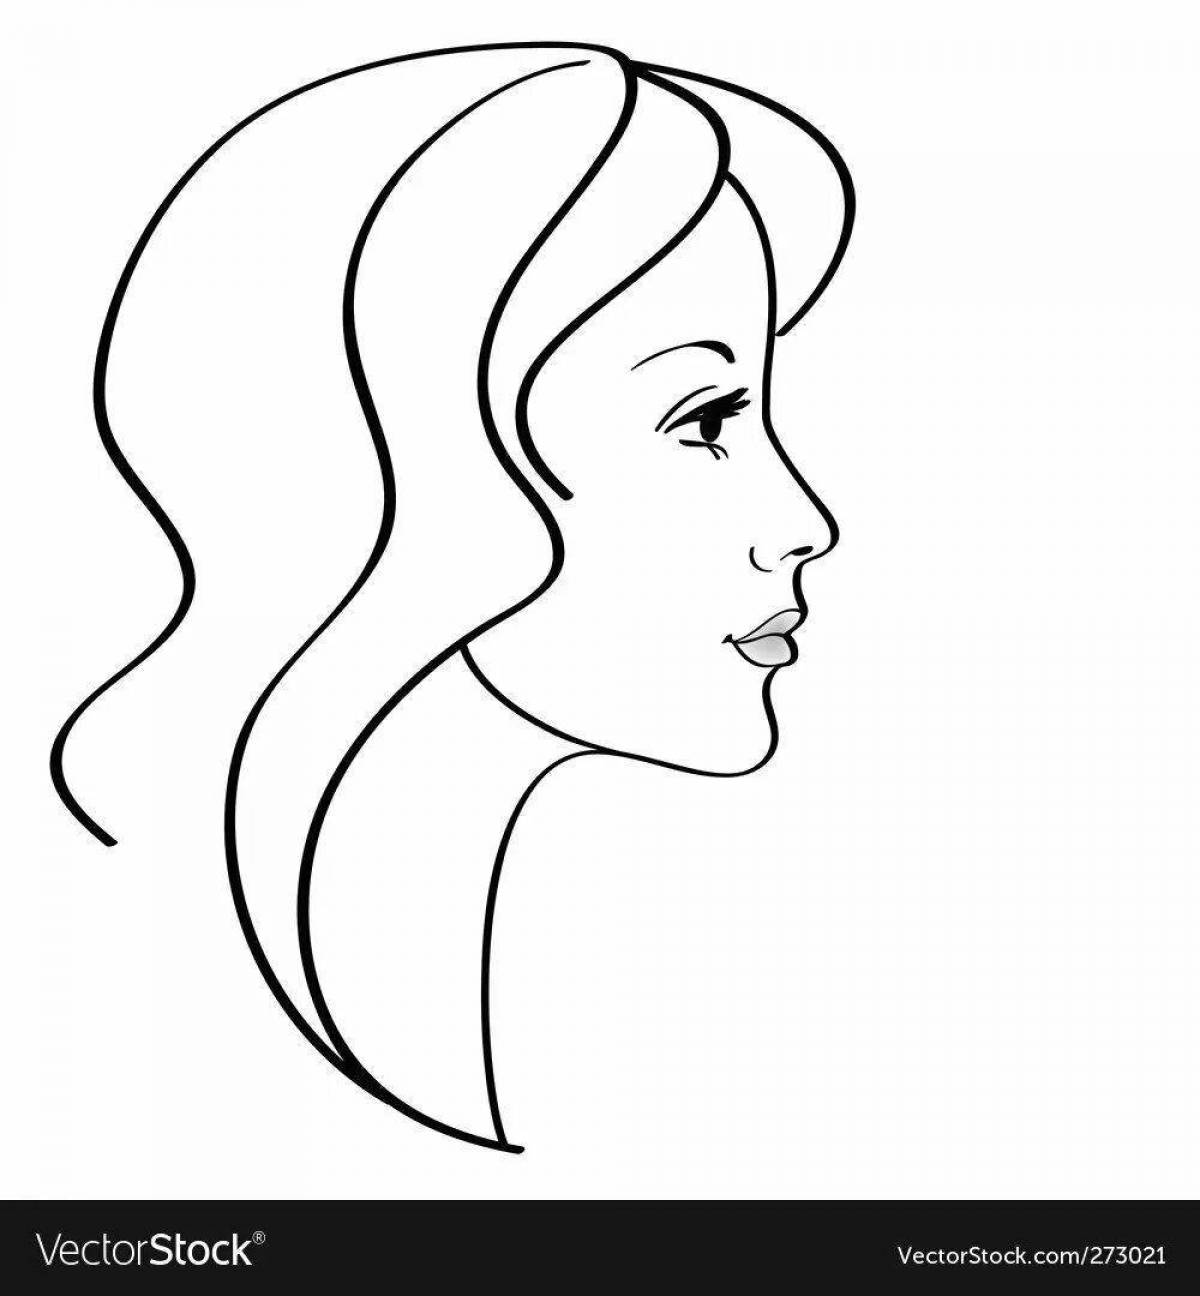 Enchanted face profile coloring page